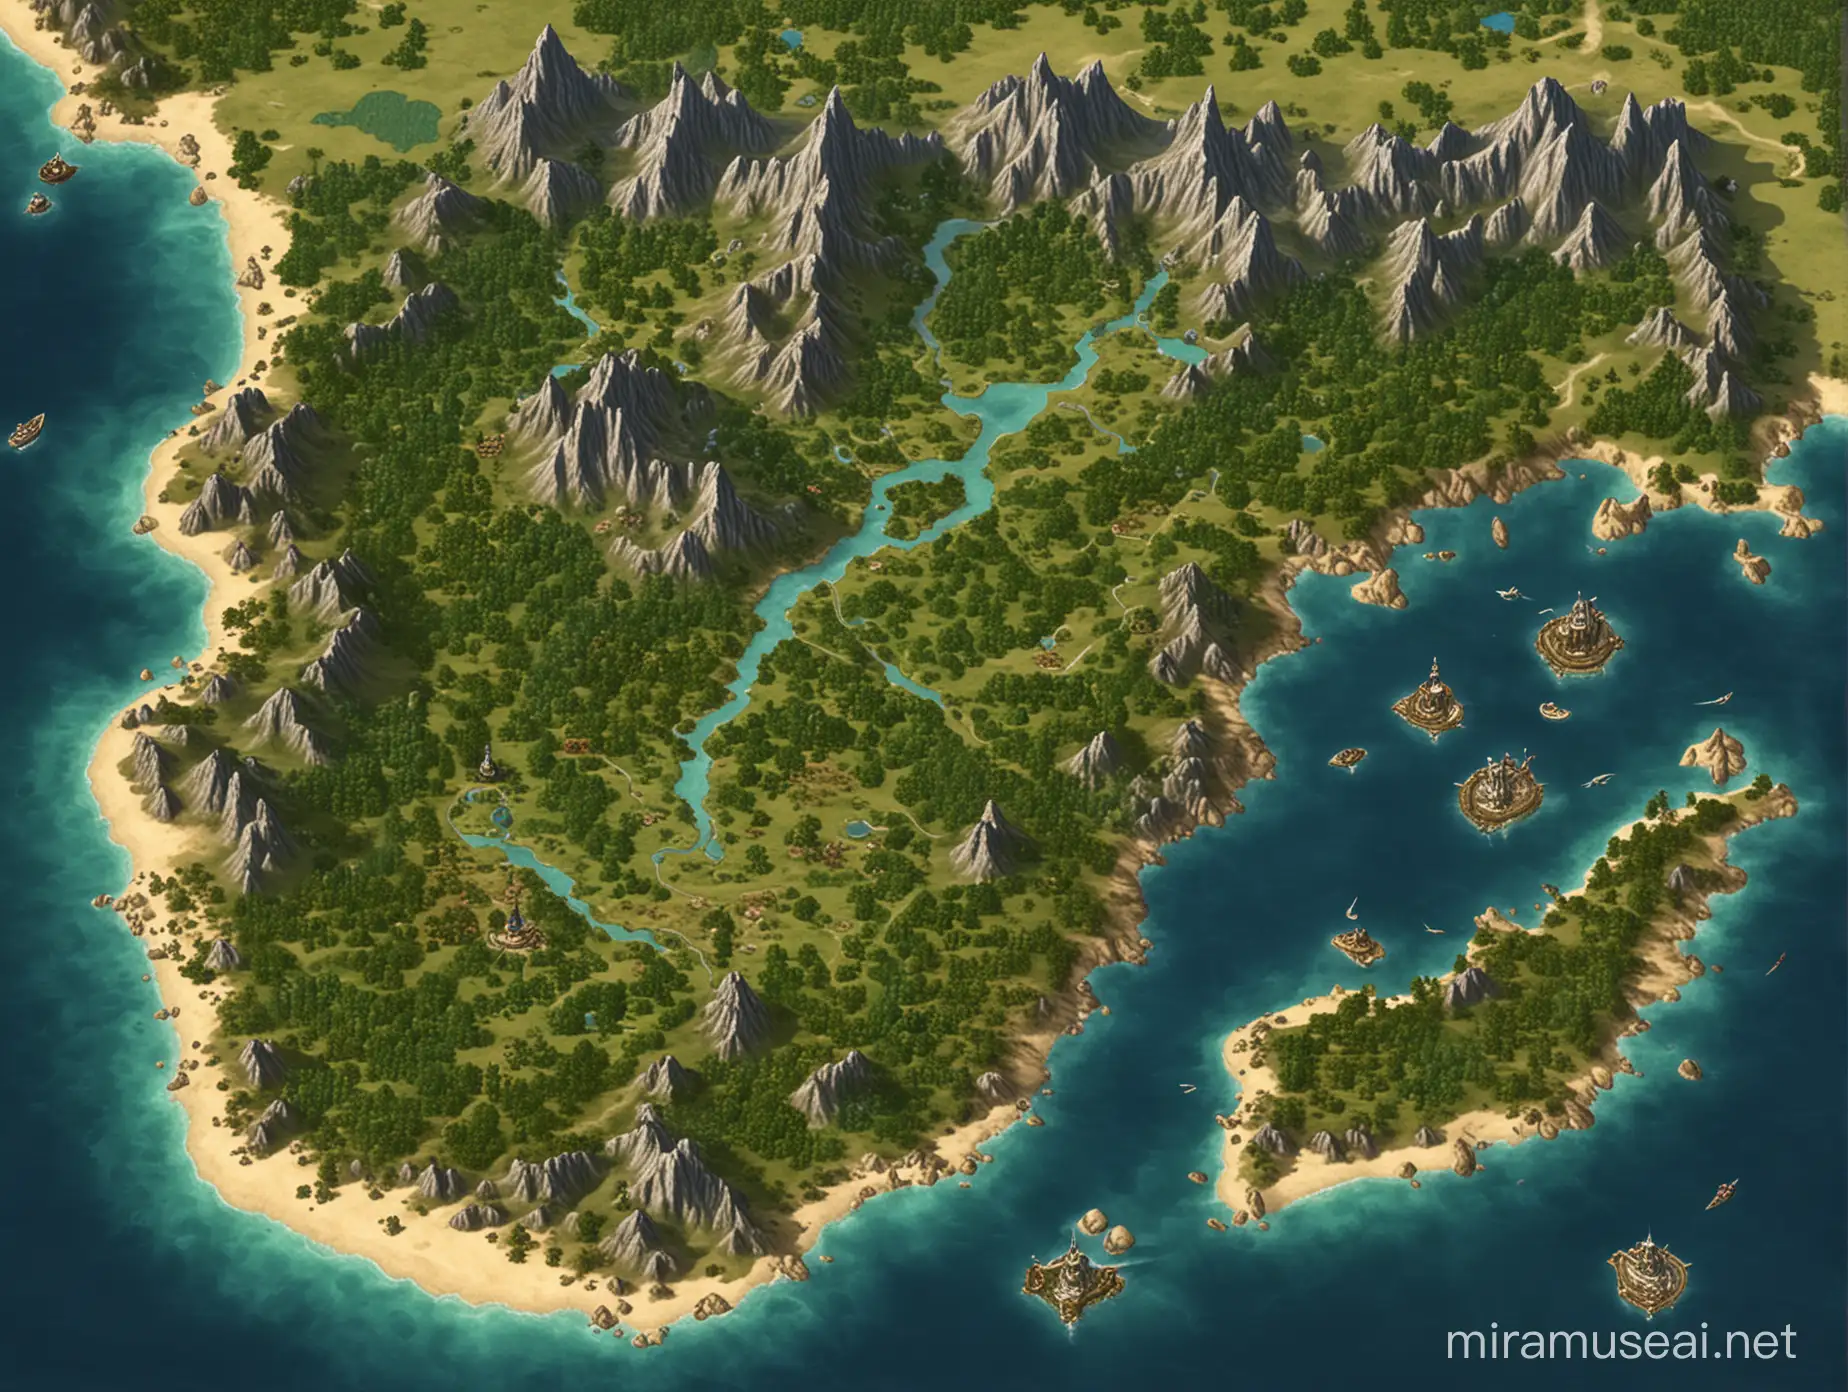 Map of an ultima online shard with oceans, mountains, forests, swamps, desert sand and islands